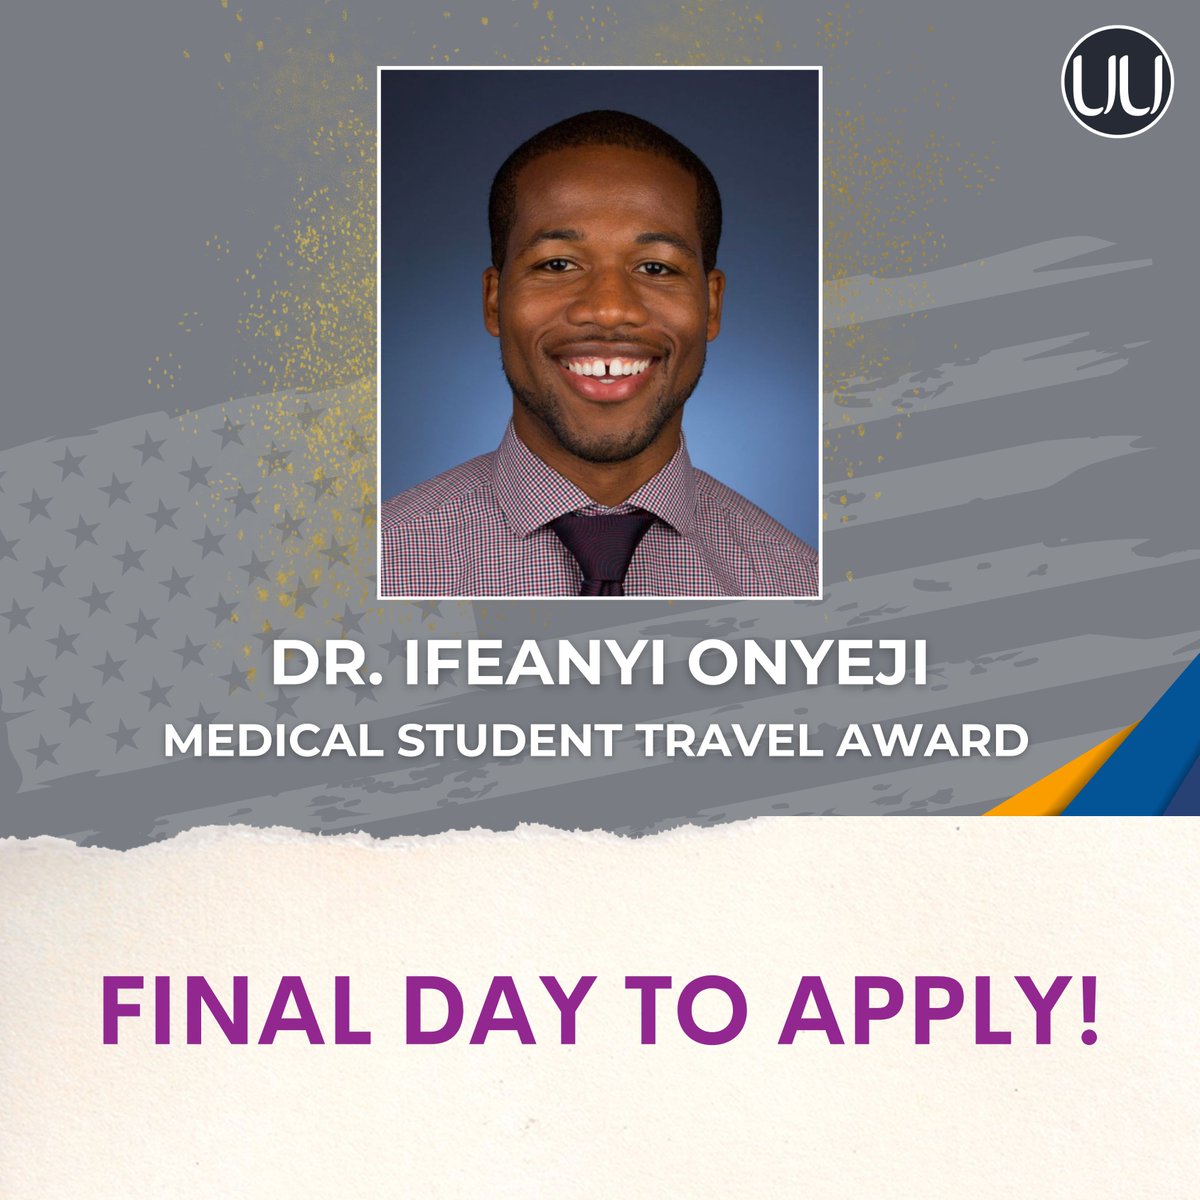 Last day to apply for the Dr. Ifeanyi Onyeji Medical Student Travel Award! Don't miss the chance for travel and registration support at the #AUA24 Annual Meeting in San Antonio, Texas. Apply Now! bit.ly/2024TravelAward @rfrankjones_uro @UroAcademic @SocietyofBAS @SWIUorg